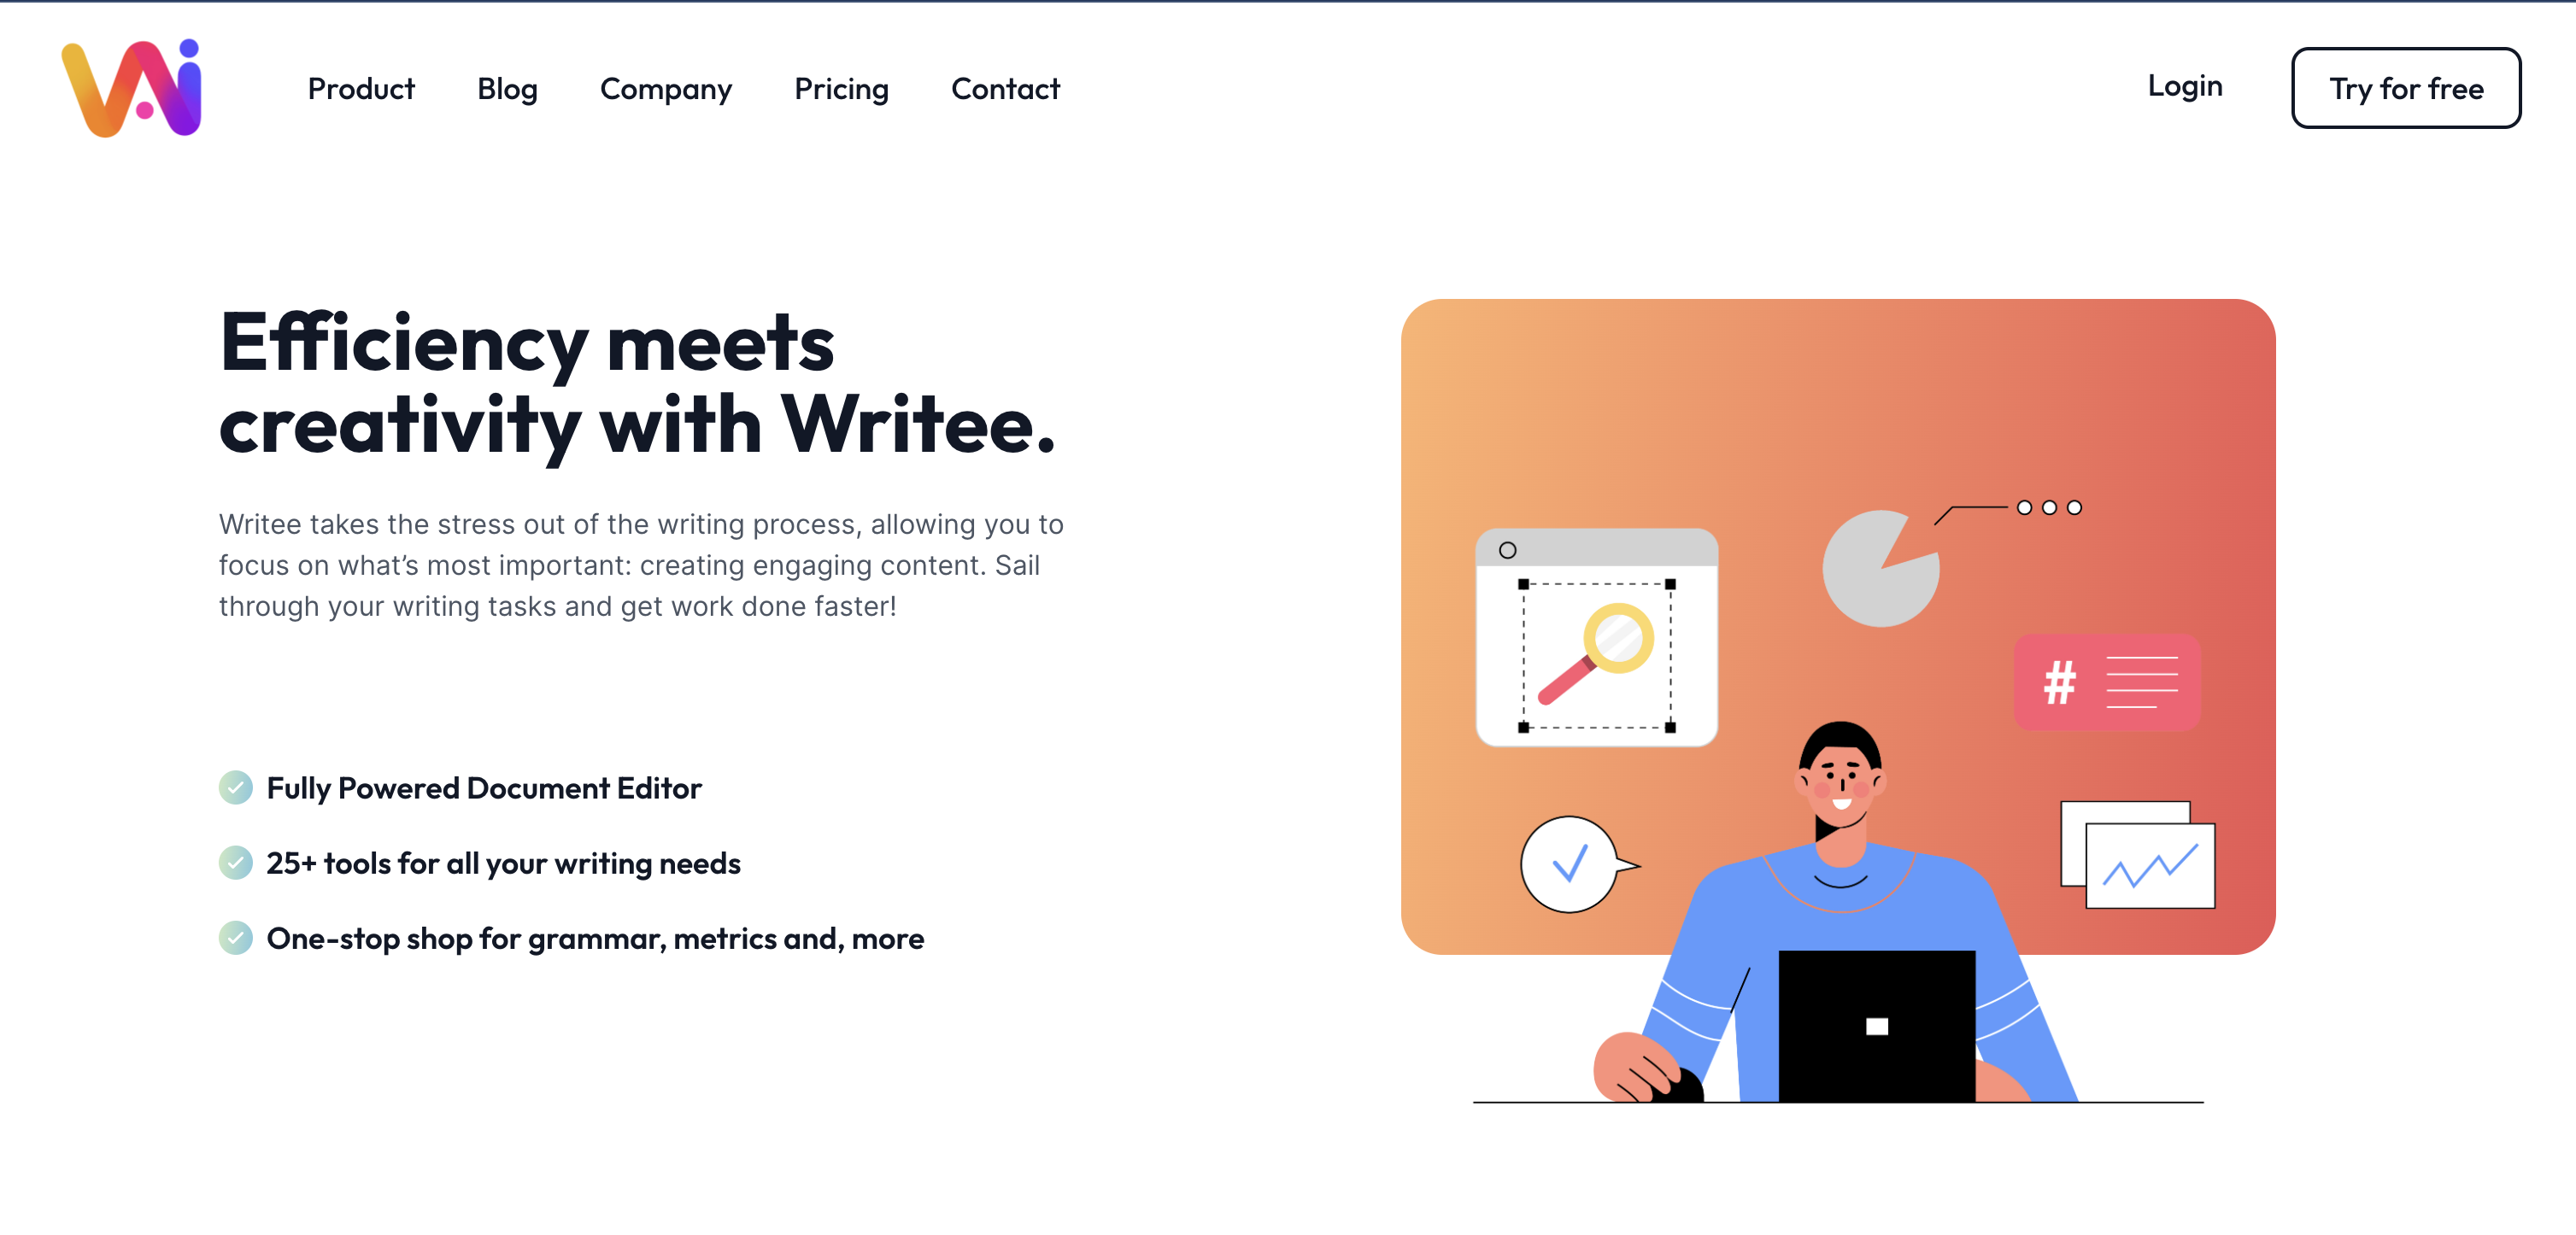 Writee AI - Provided Value and Producct Offering